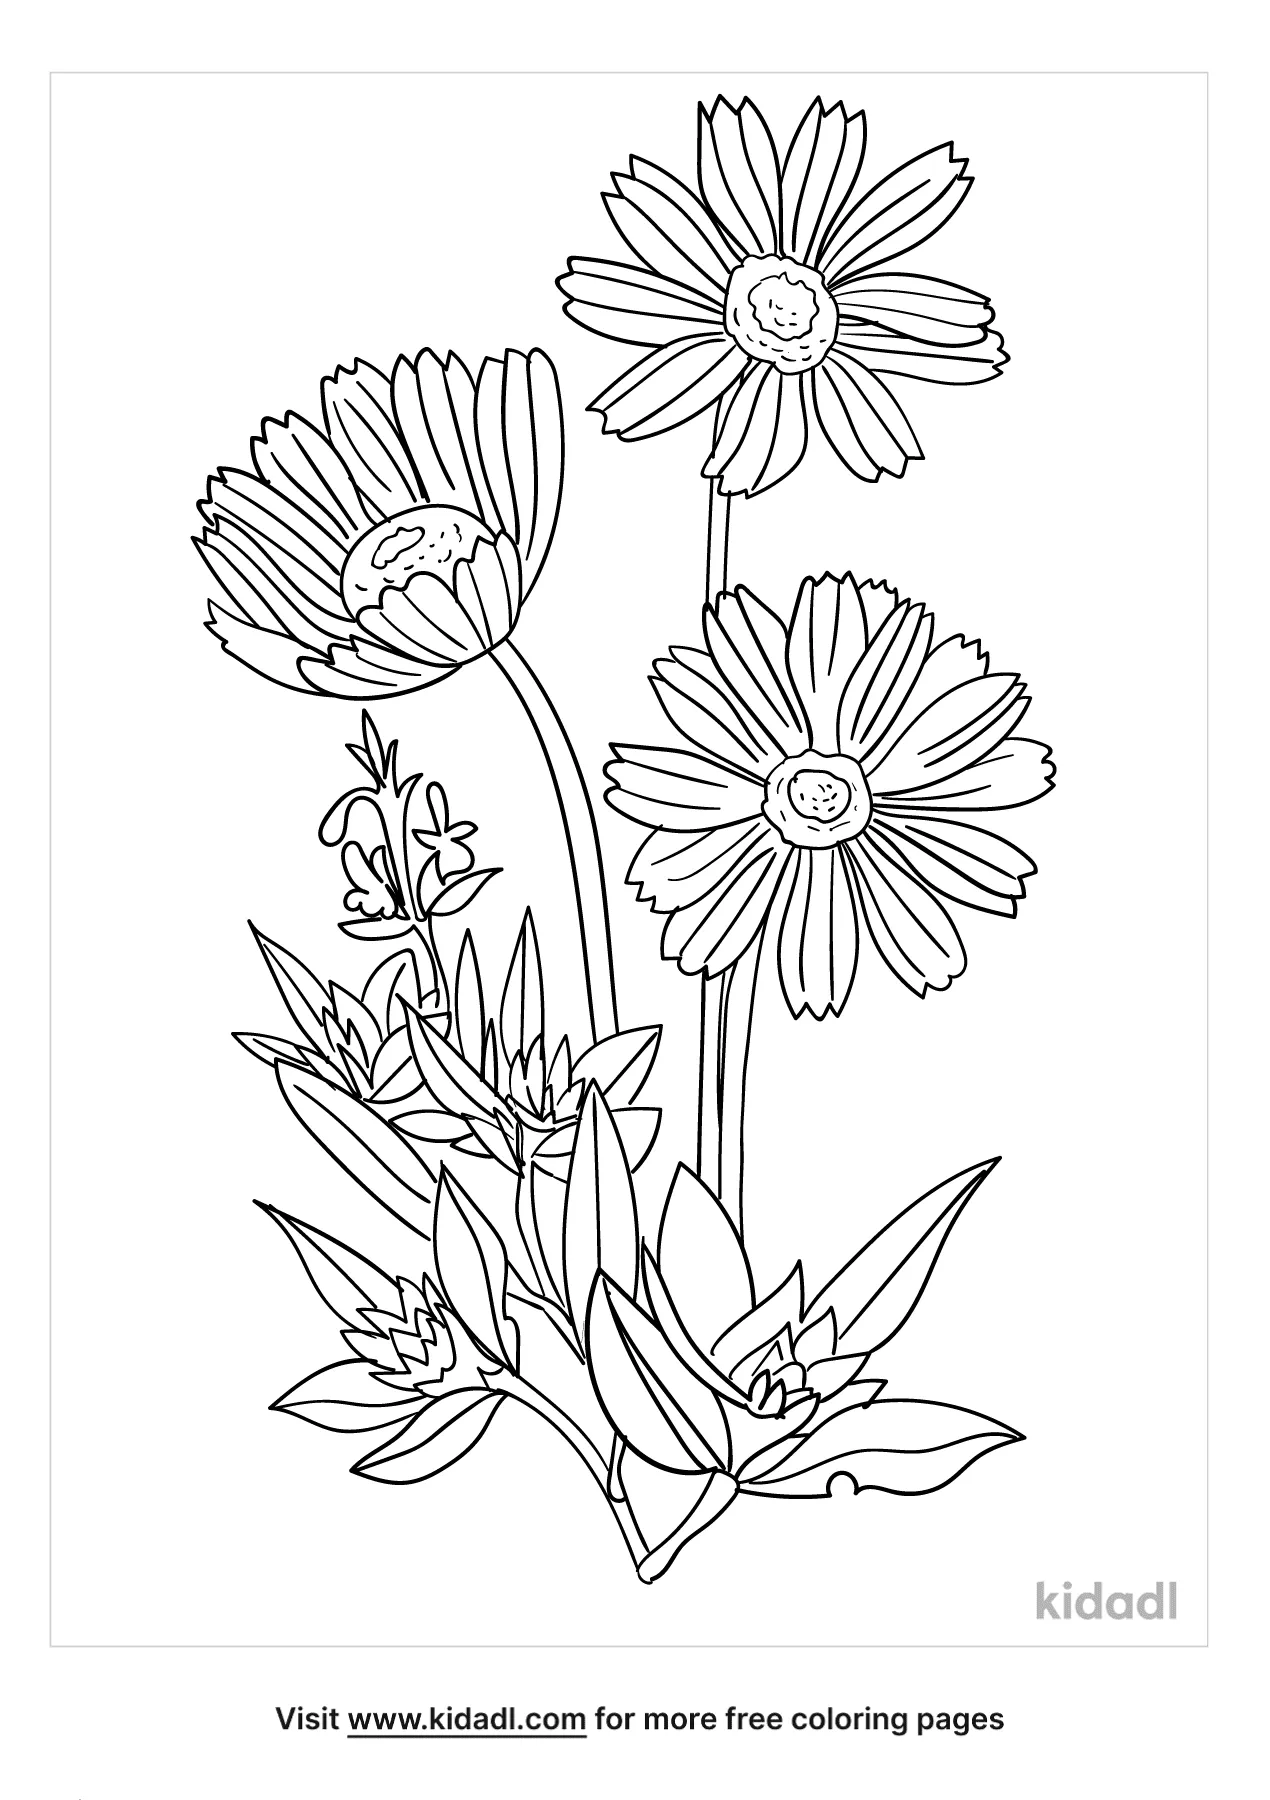 Blanket Flower Coloring Page